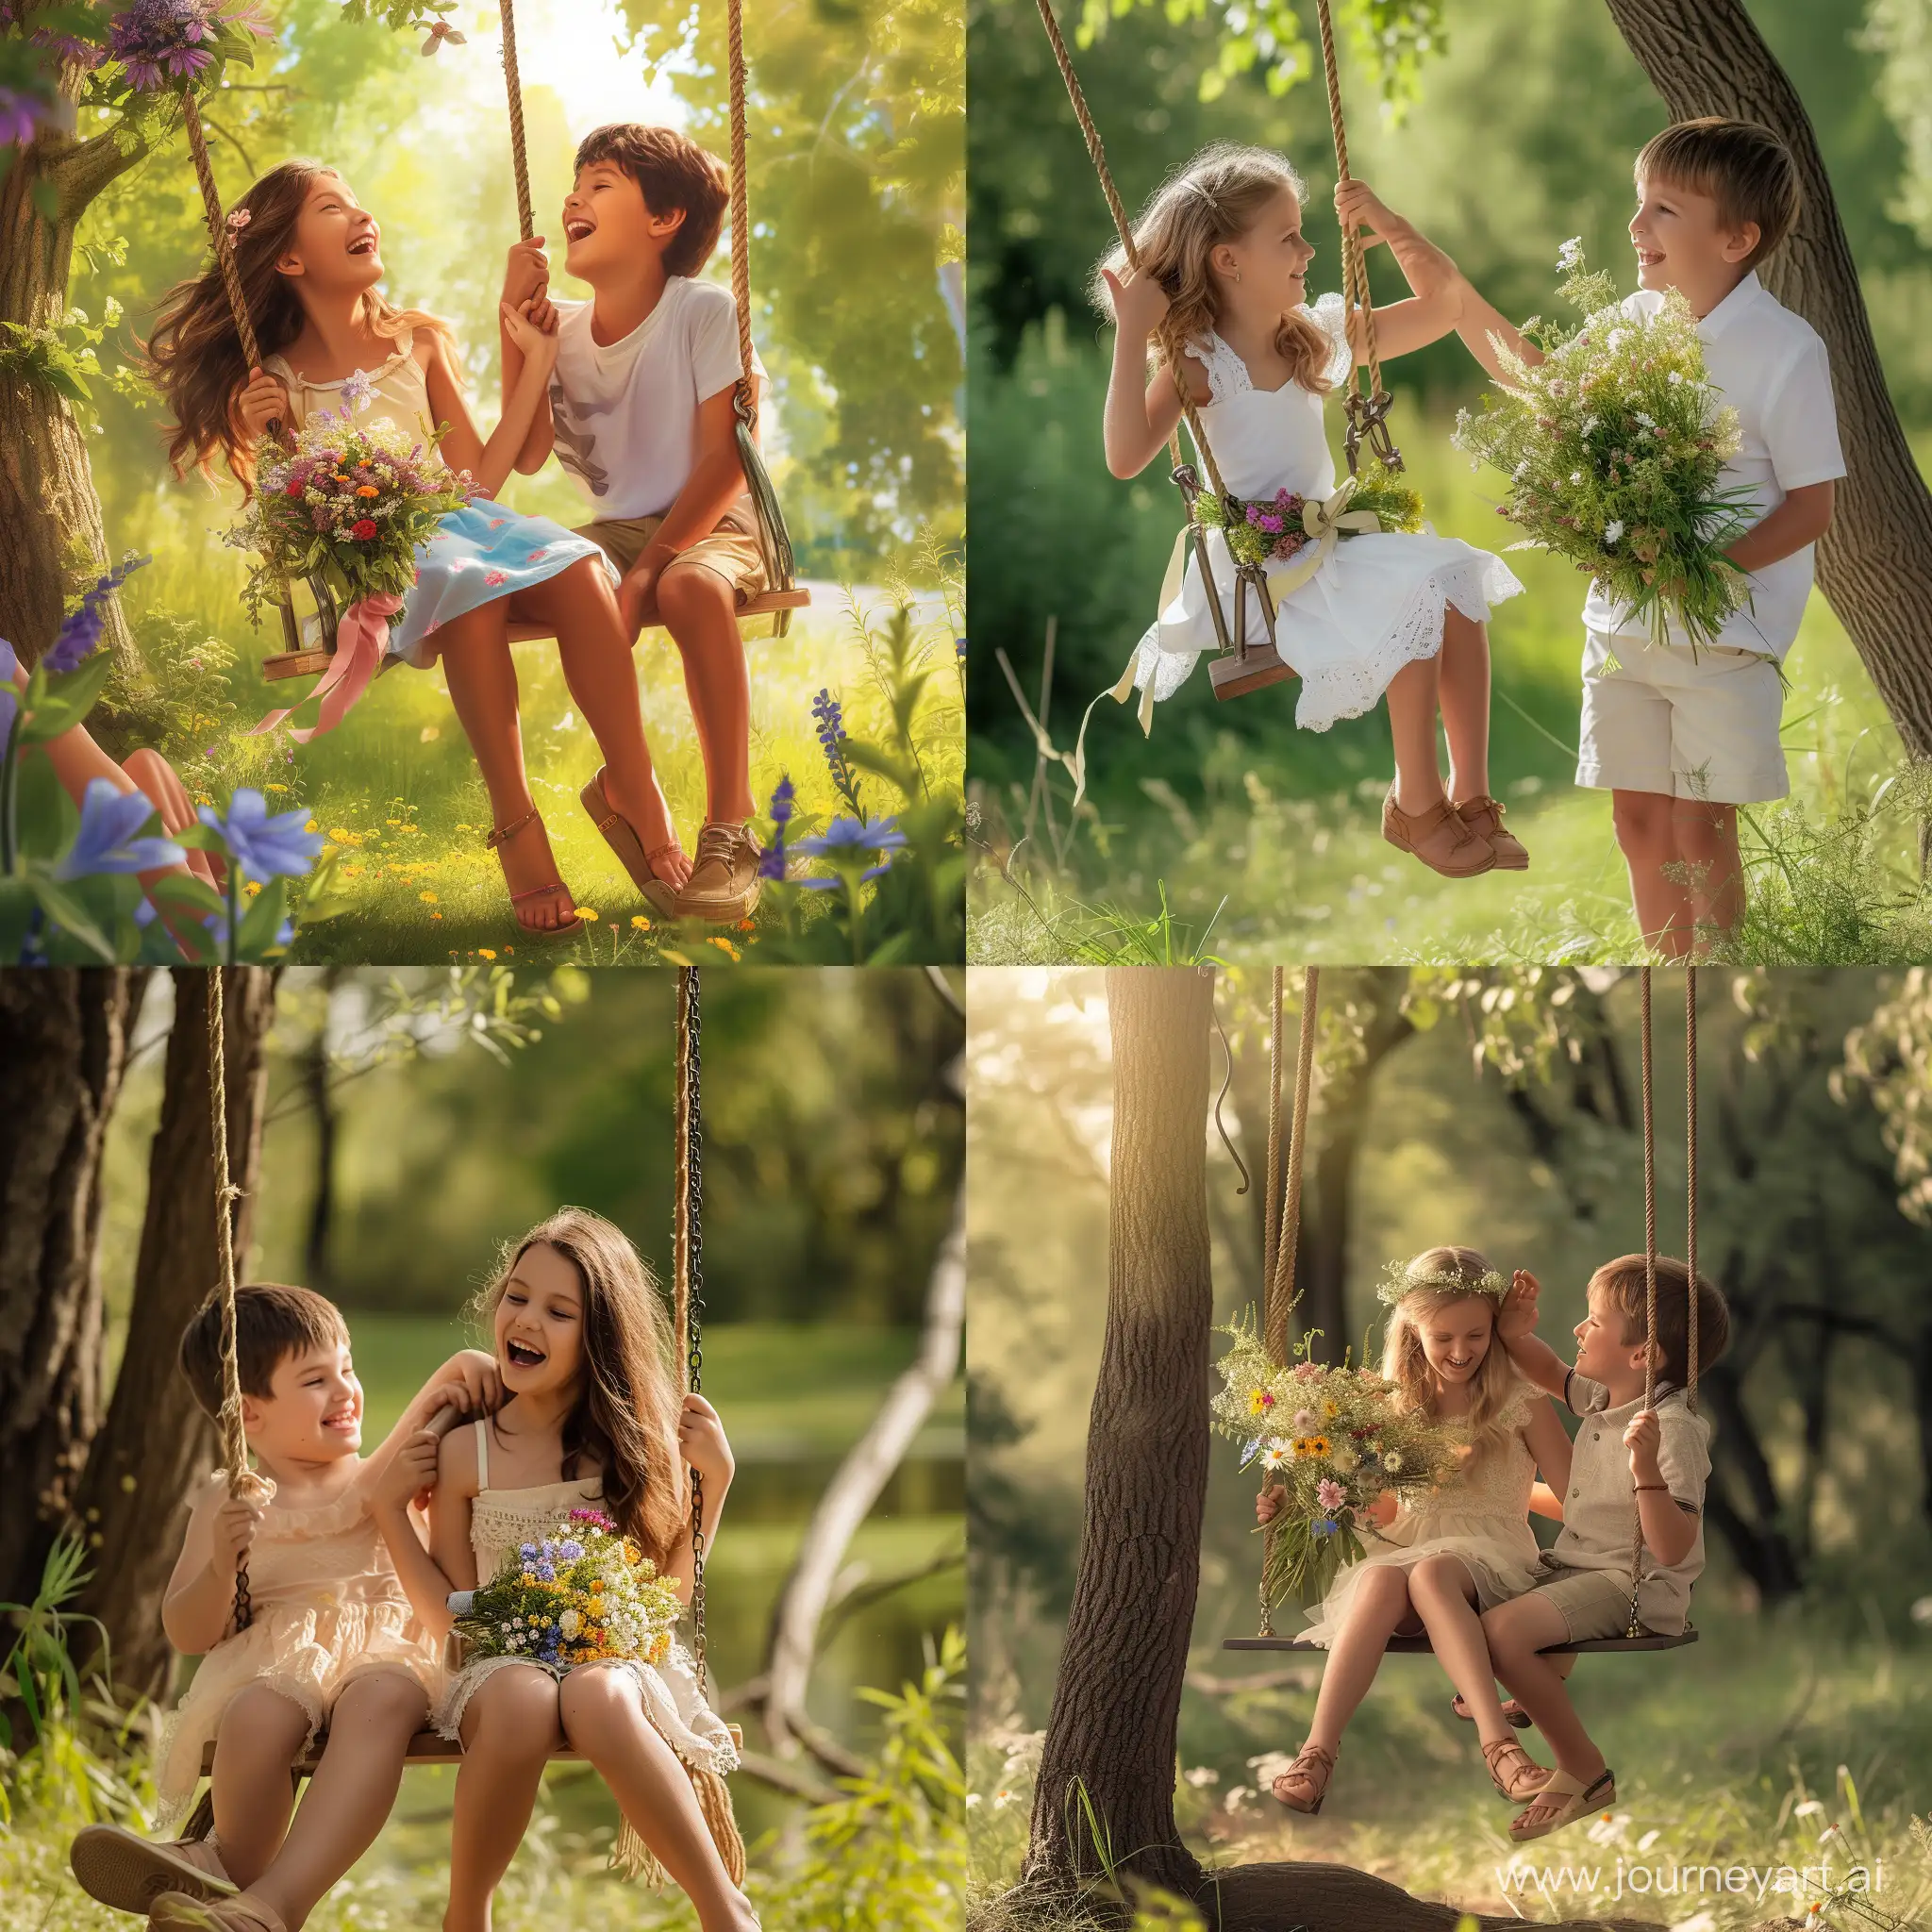 Joyful-Summer-Day-Children-Swinging-and-Laughing-in-a-Vibrant-Park